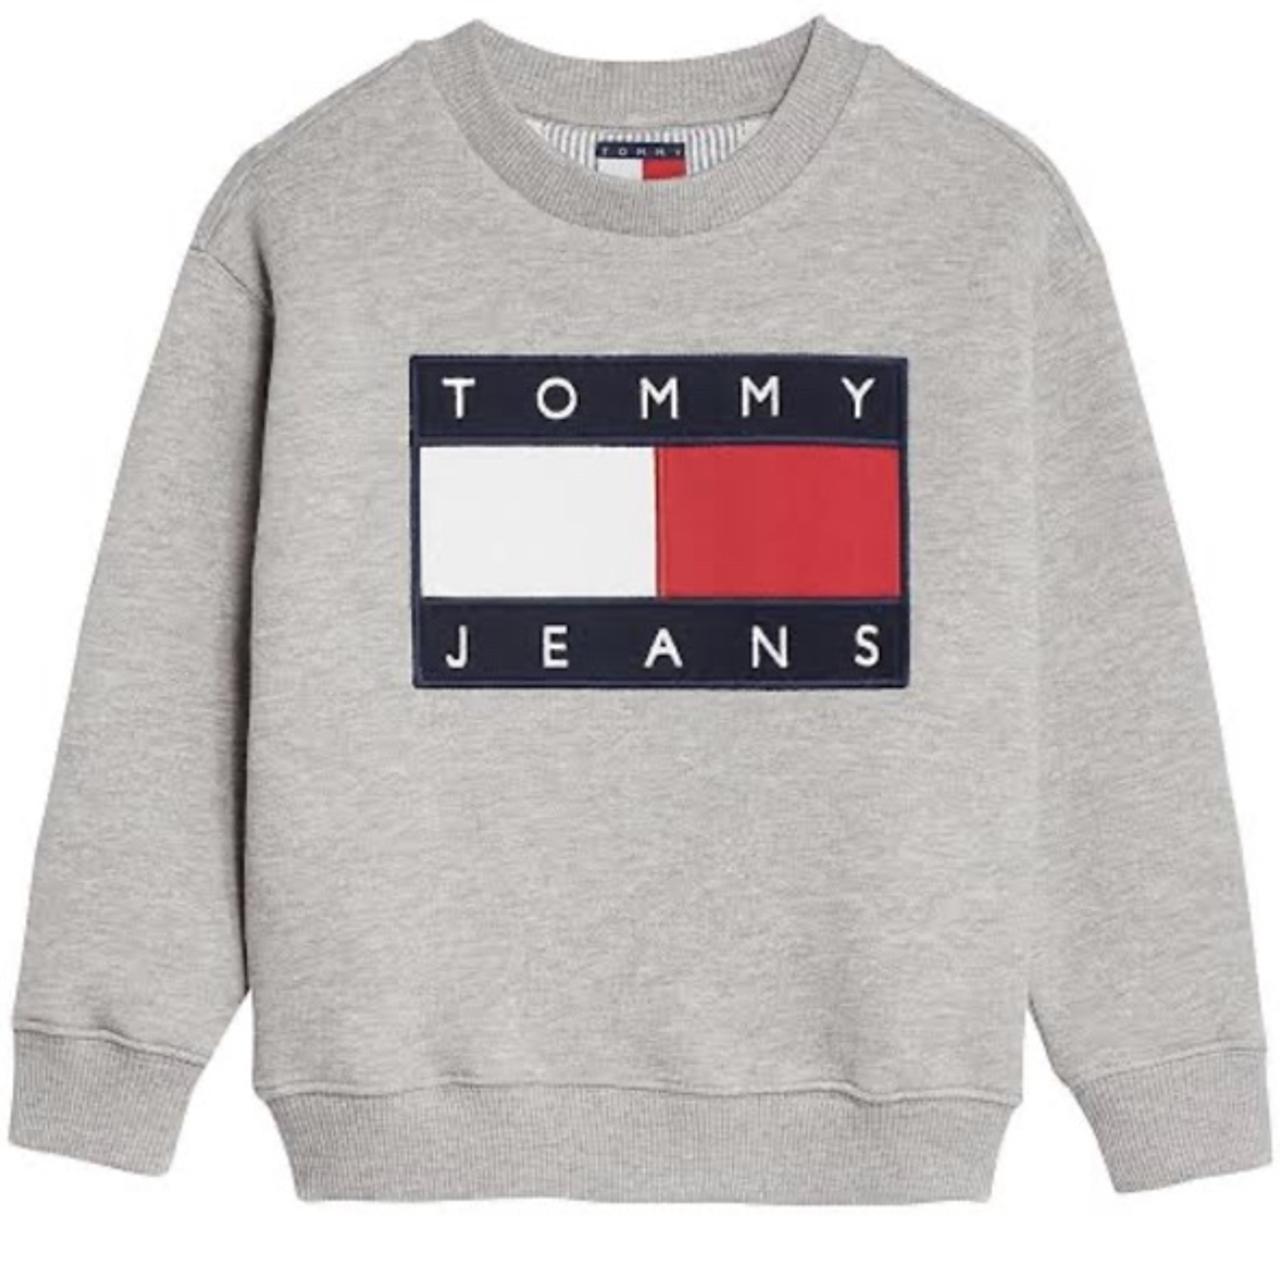 Tommy Jeans crew neck jumper in grey 🙌🏼 Perfect... - Depop